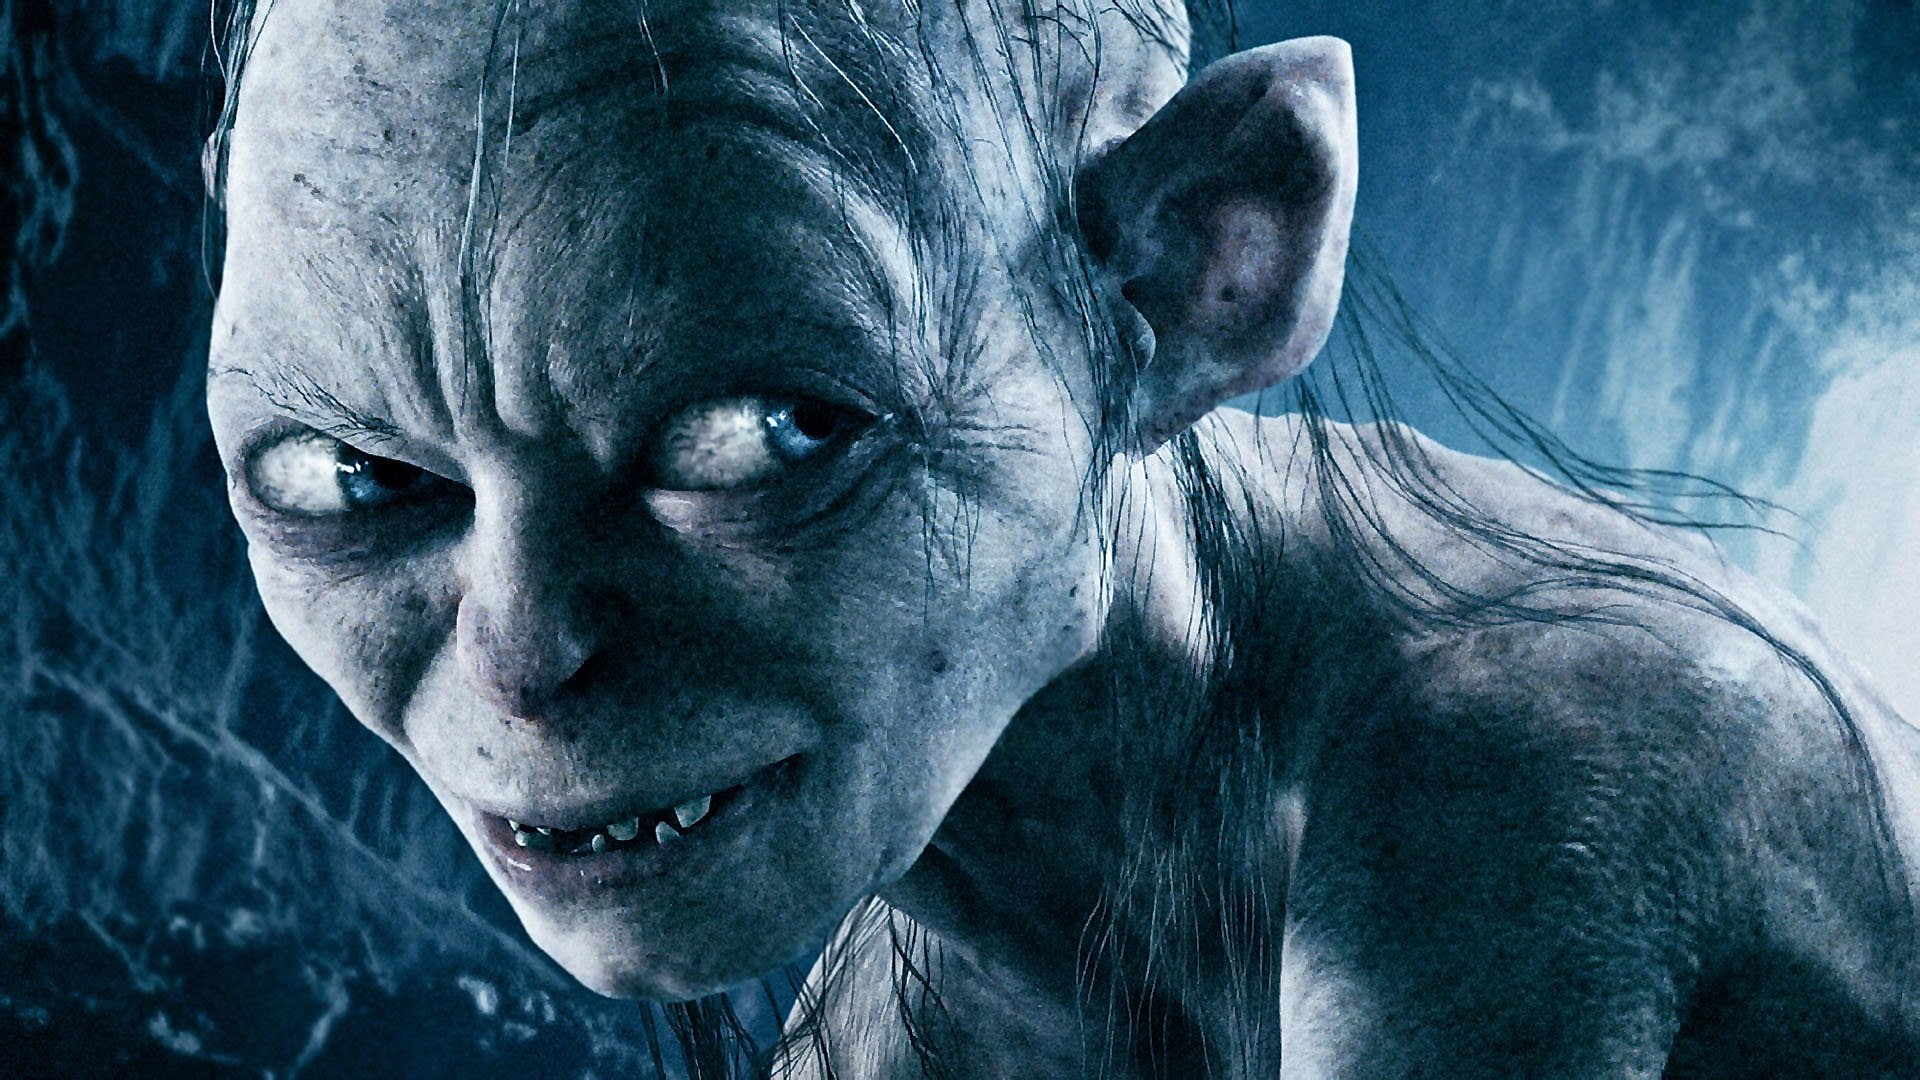 Lord Of The Rings Gollum digital wallpaper, The Lord of the Rings